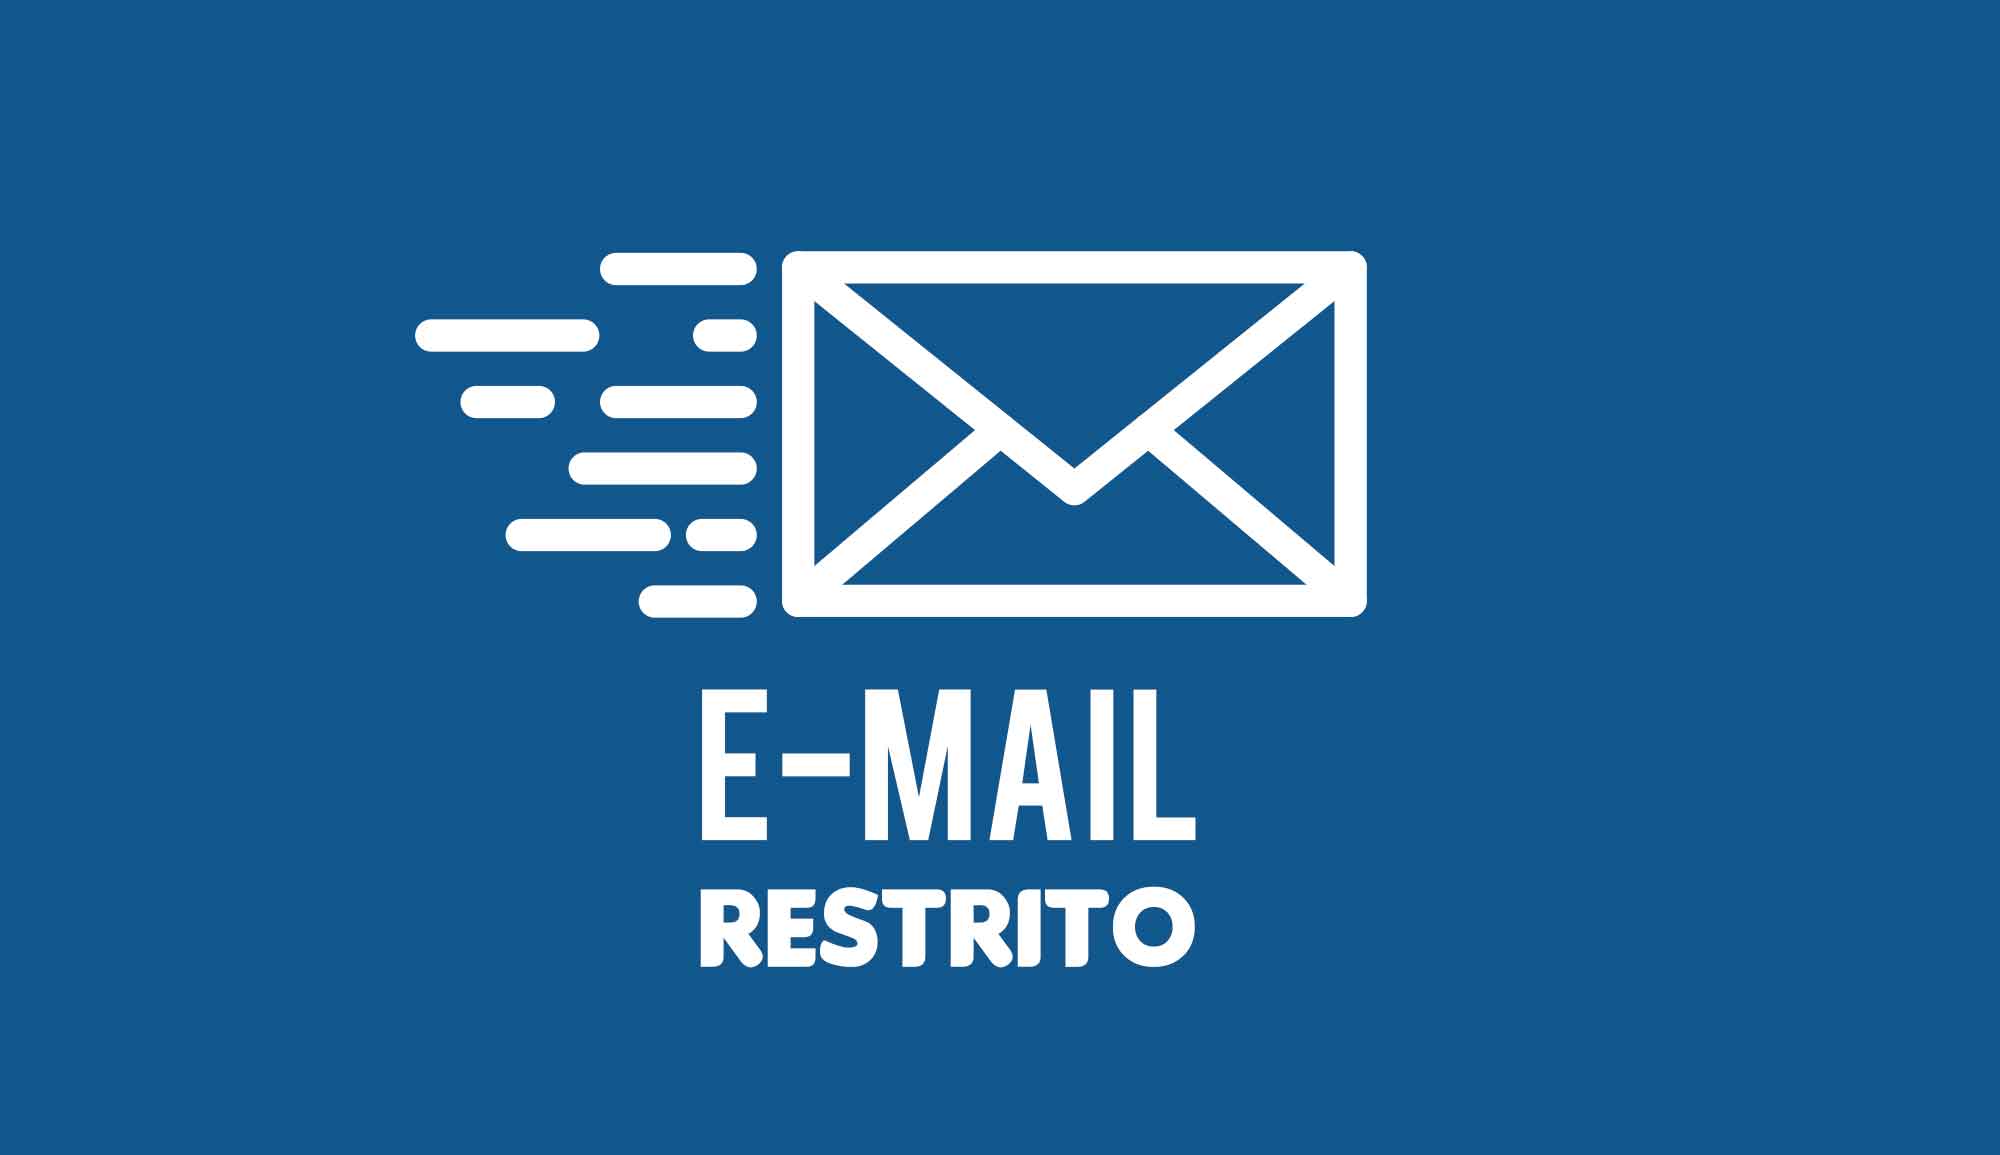 https://asmgoficial.com.br/wp-content/uploads/2021/07/EMAIL.jpgs